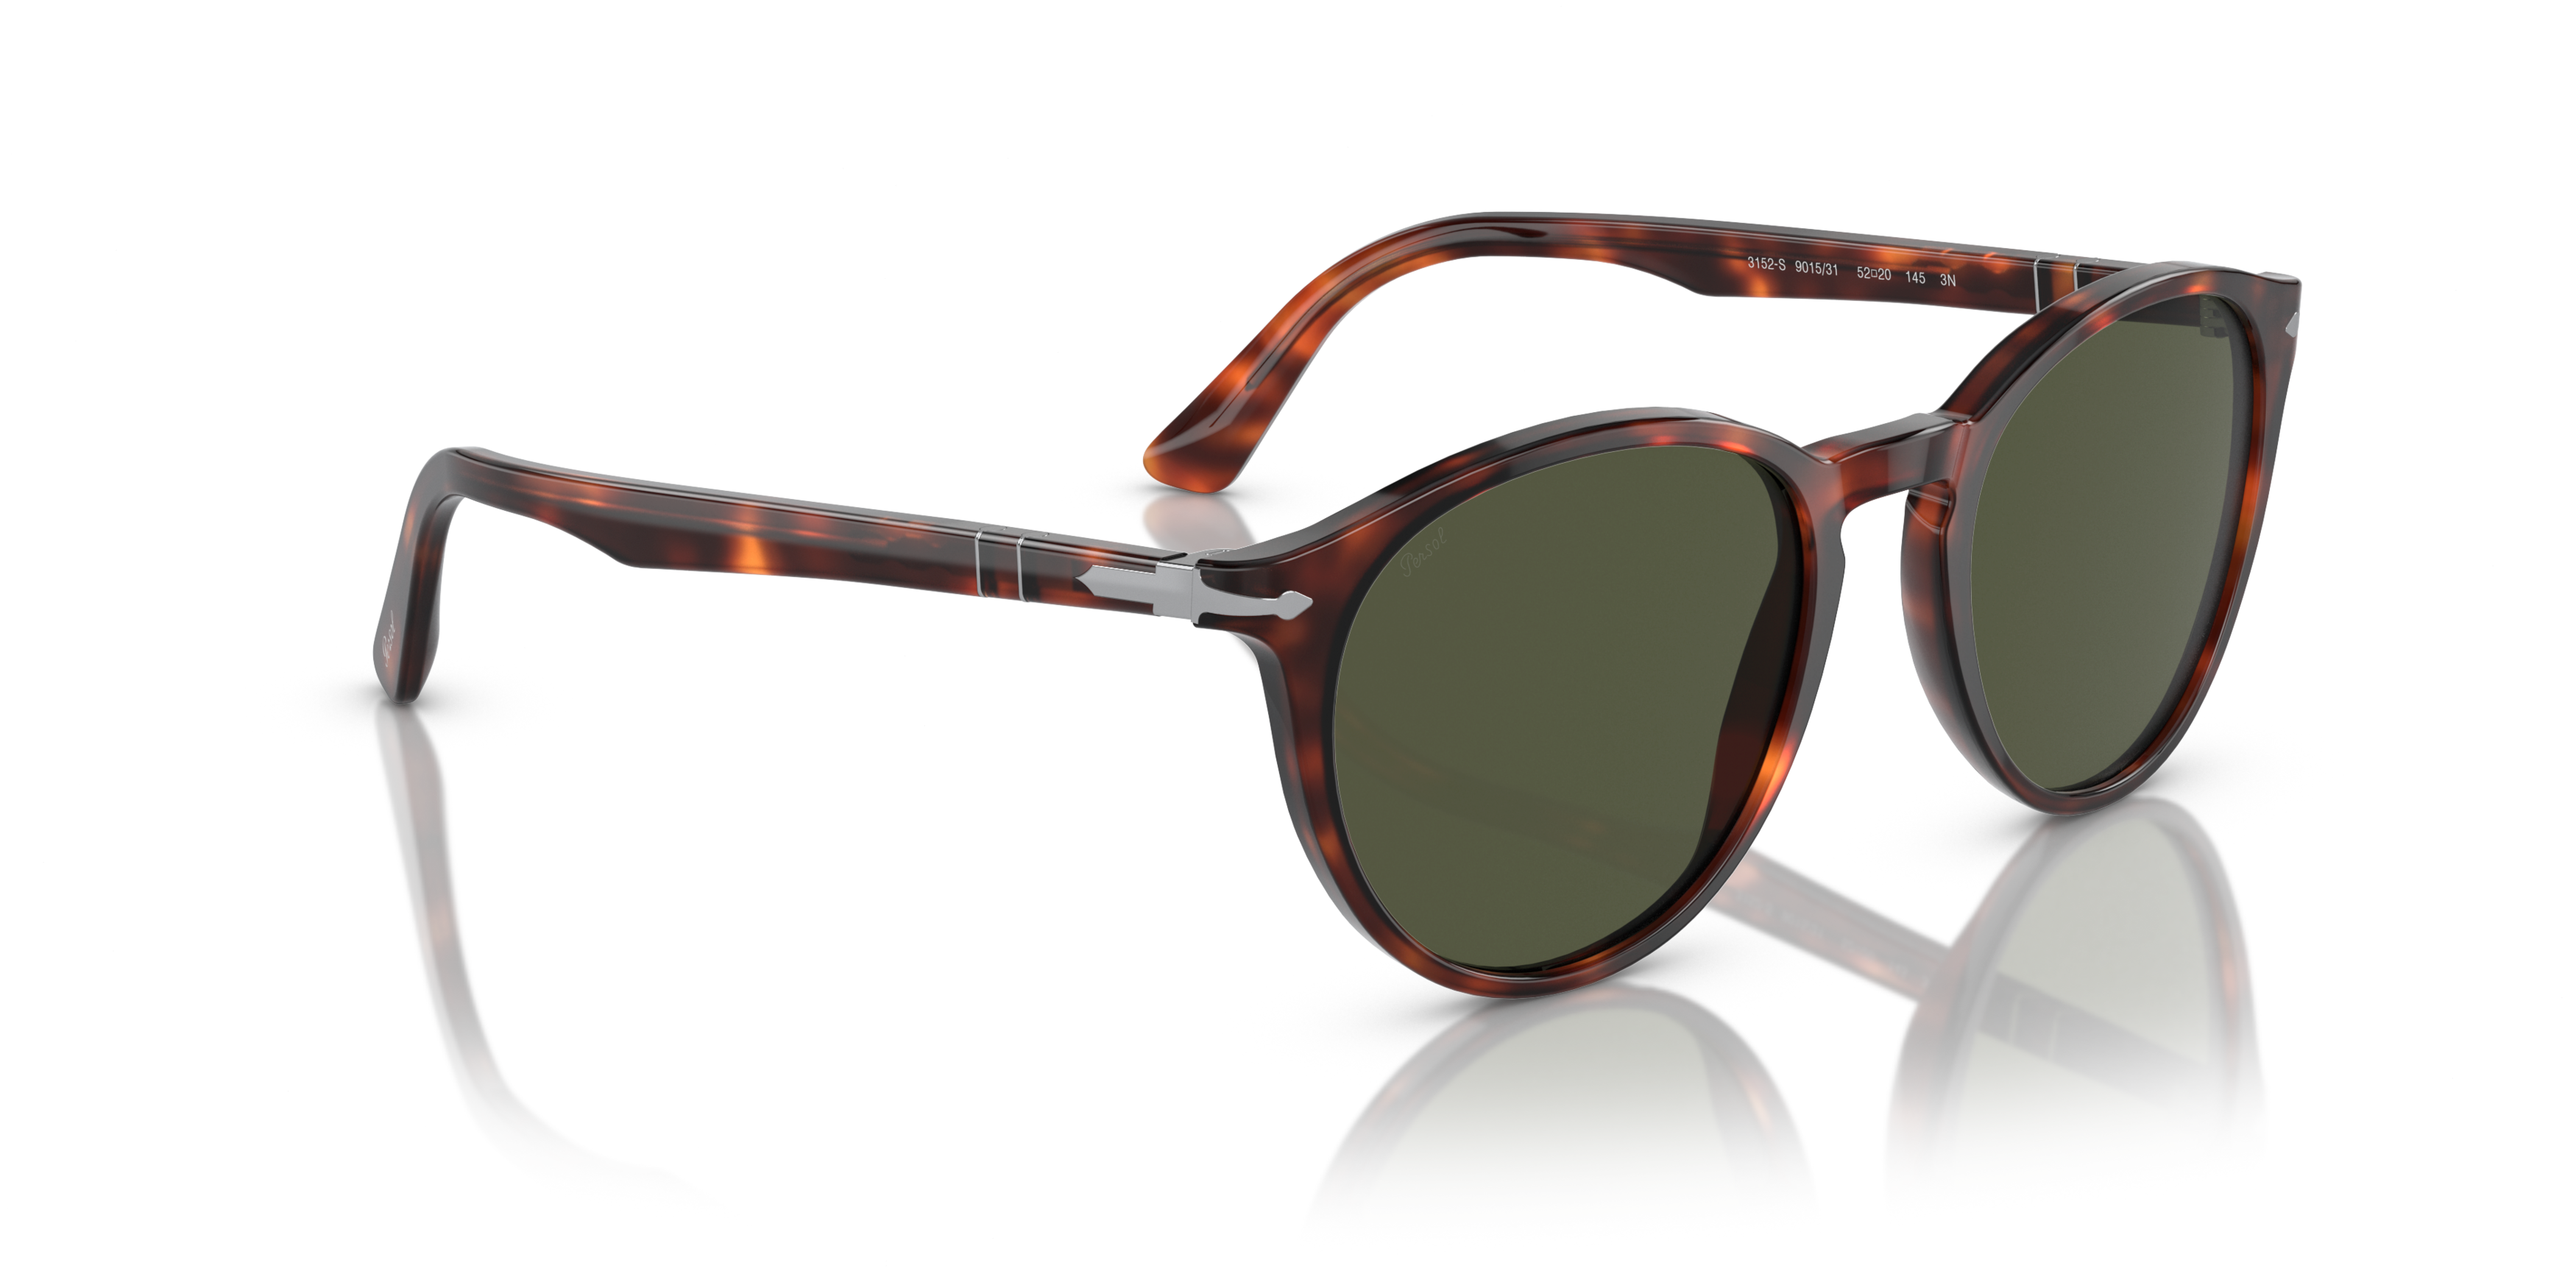 [products.image.angle_right01] Persol 0PO3152S 901531